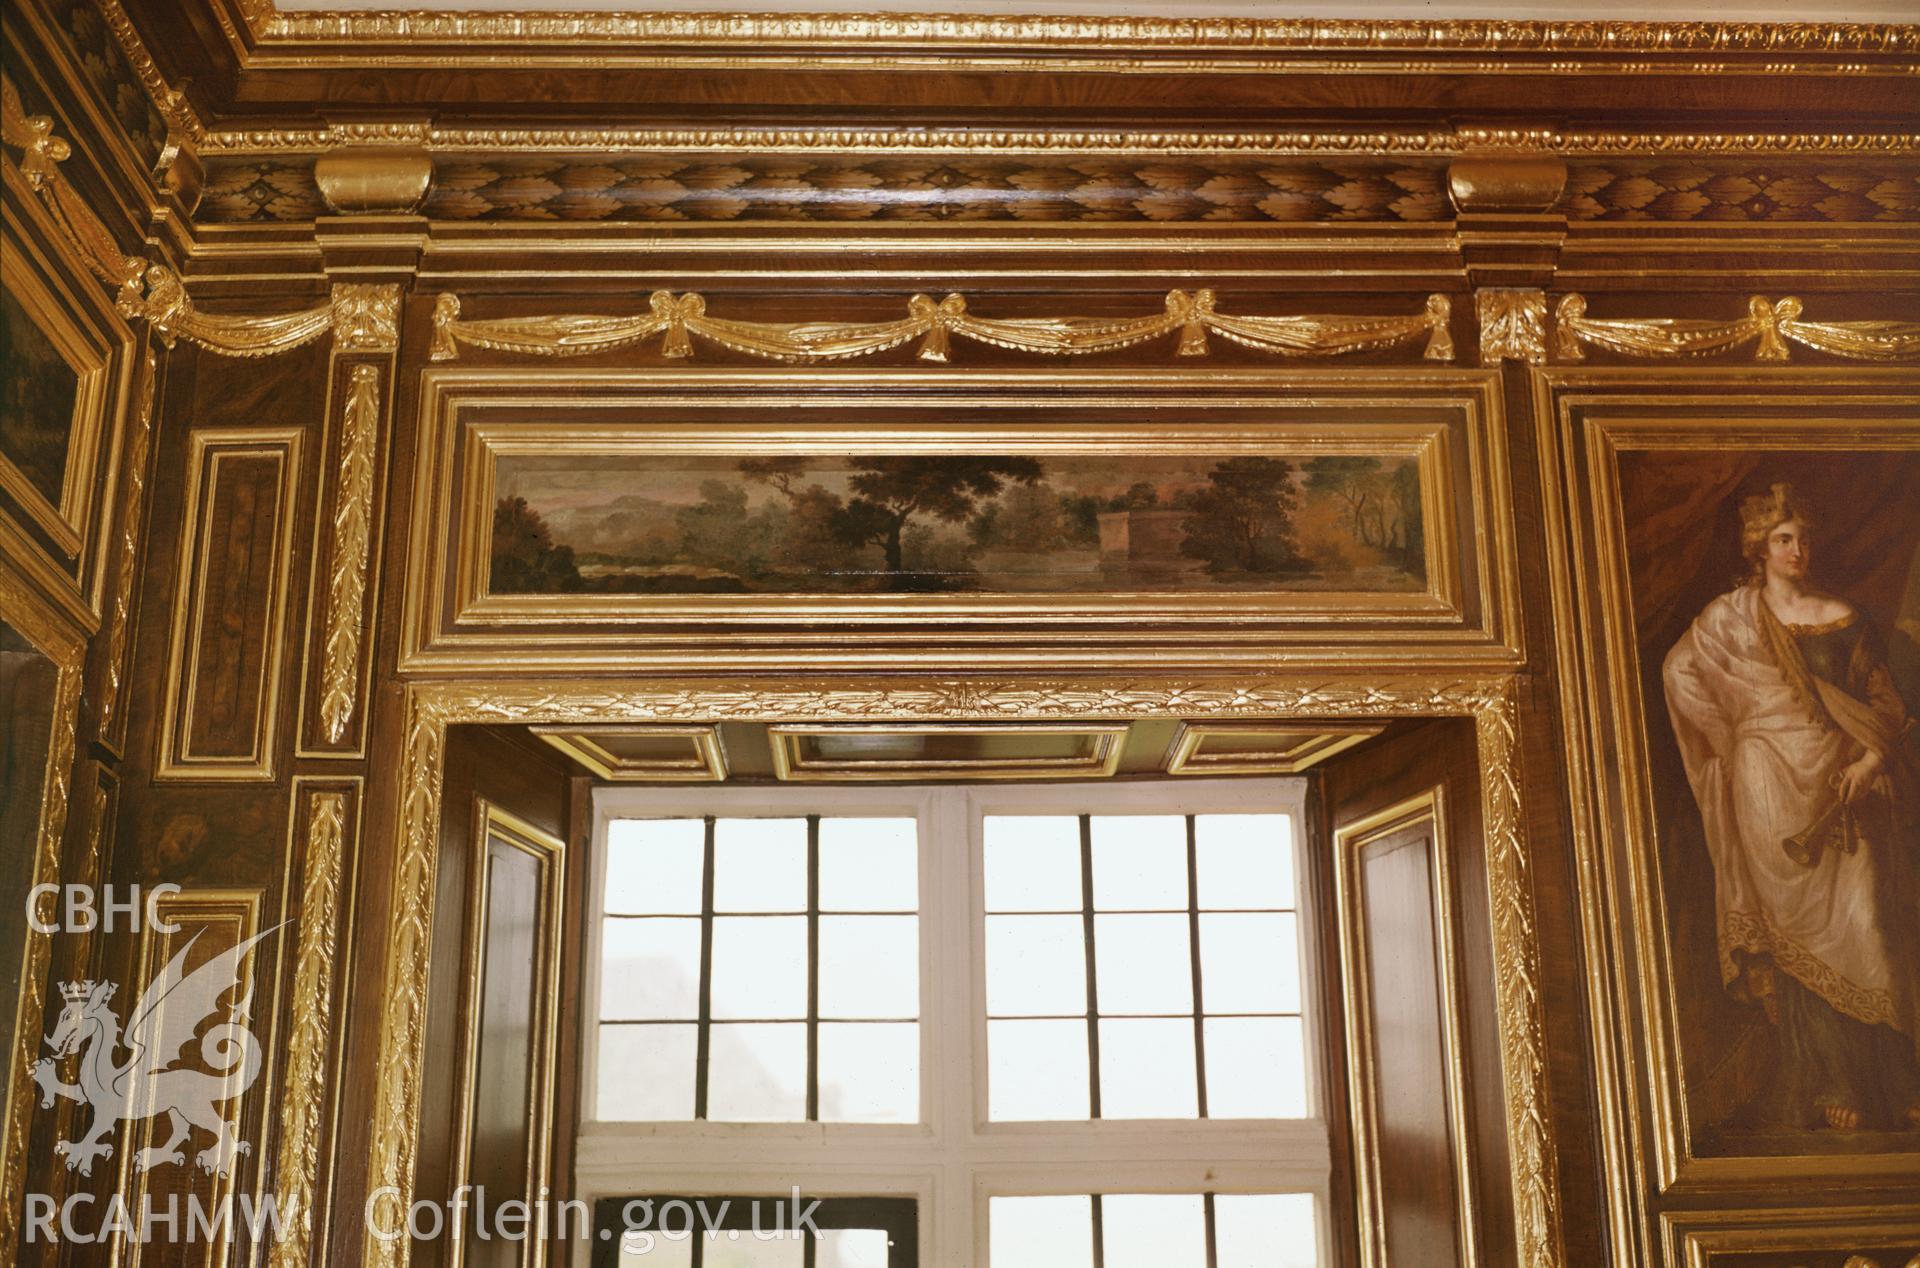 RCAHMW colour transparency showing view of The Gilt Room at Tredegar House, Newport, taken by RCAHMW c.2003